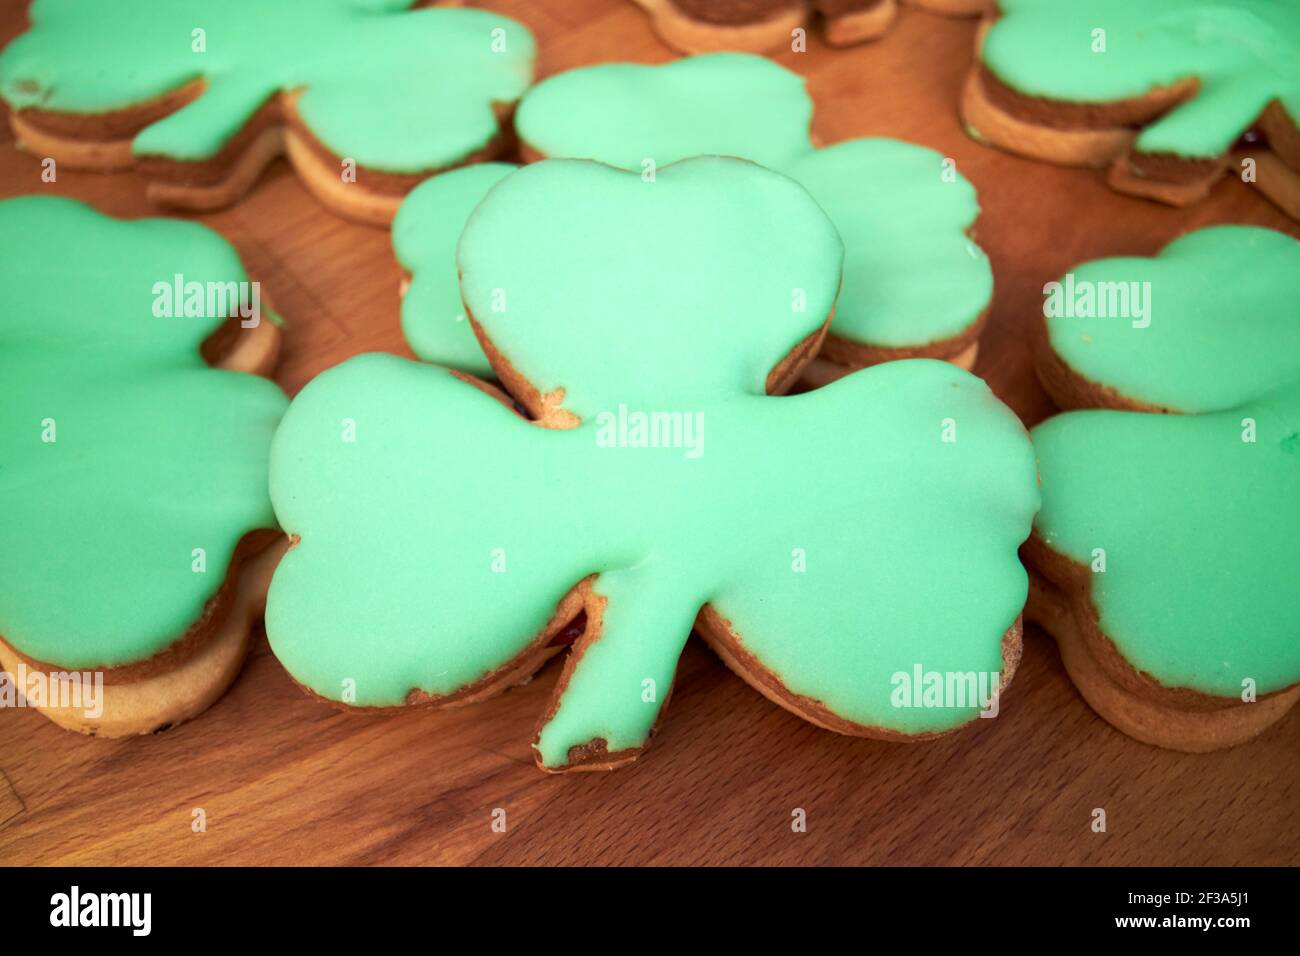 shamrock shaped biscuits produced to celebrate st patricks day in ireland Stock Photo